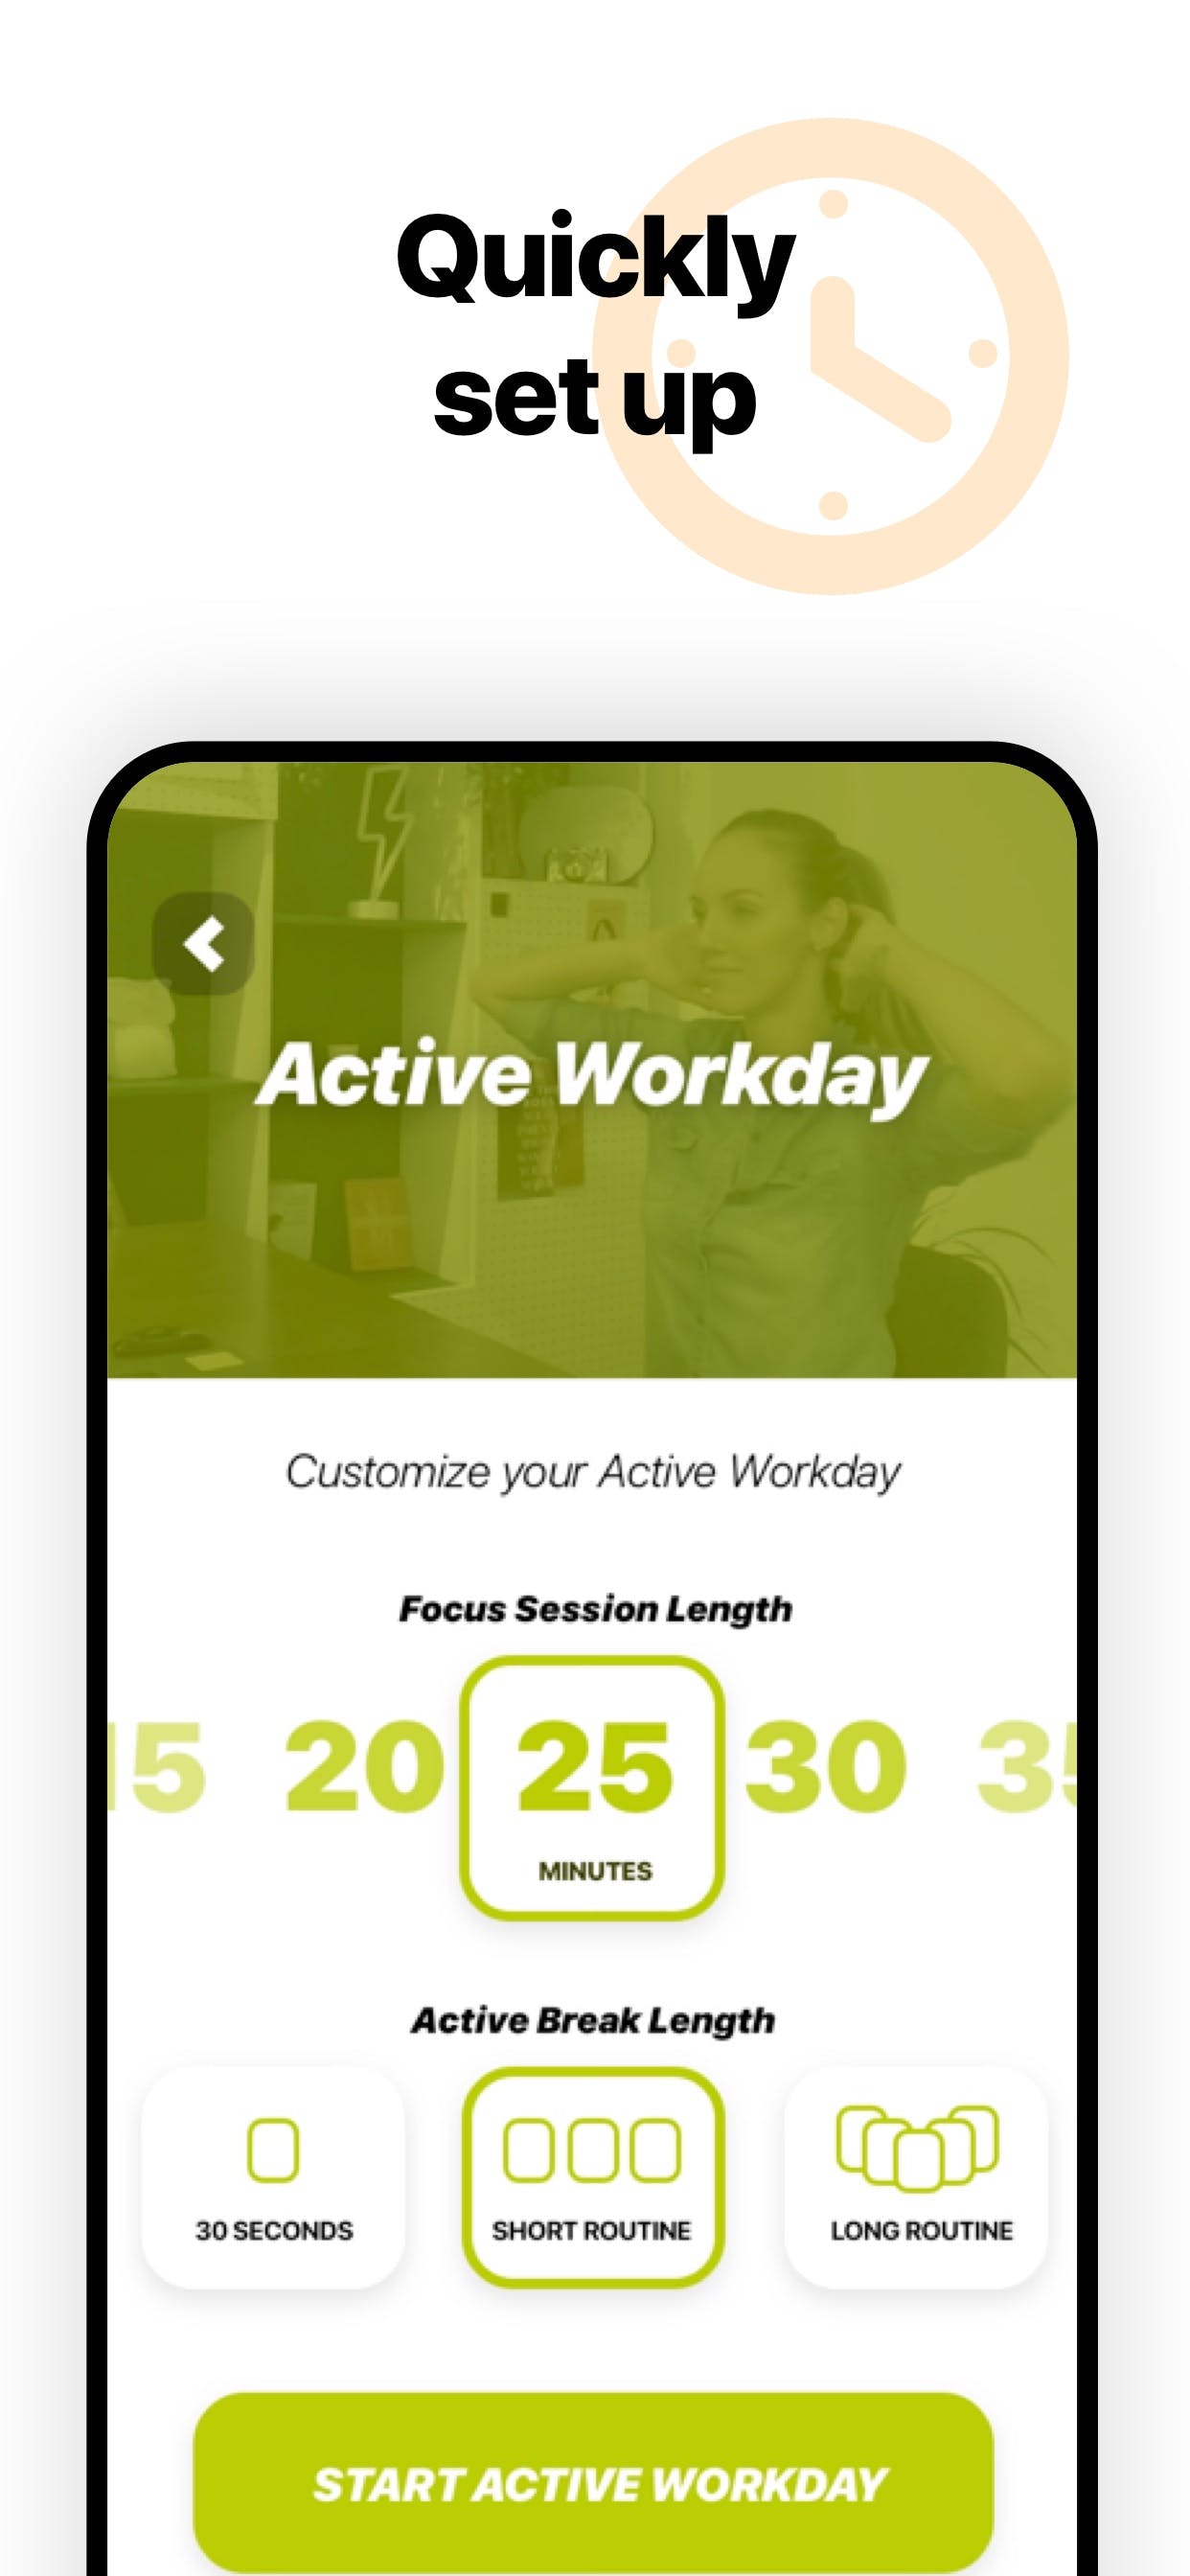 Active Workday media 2